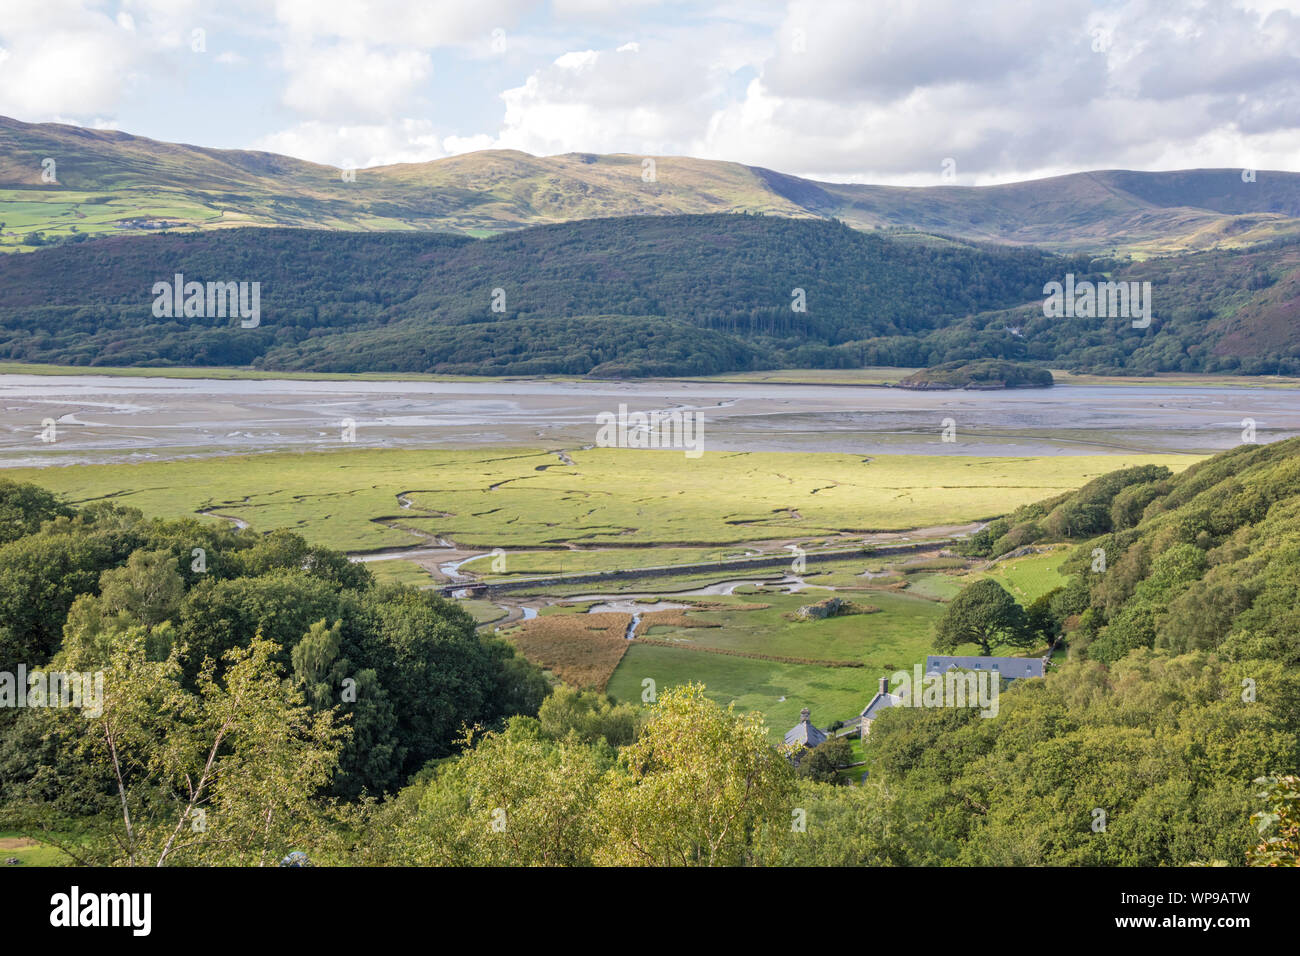 Looking over the Mawddach Estuary, Snowdonia National Park North Wales, UK Stock Photo